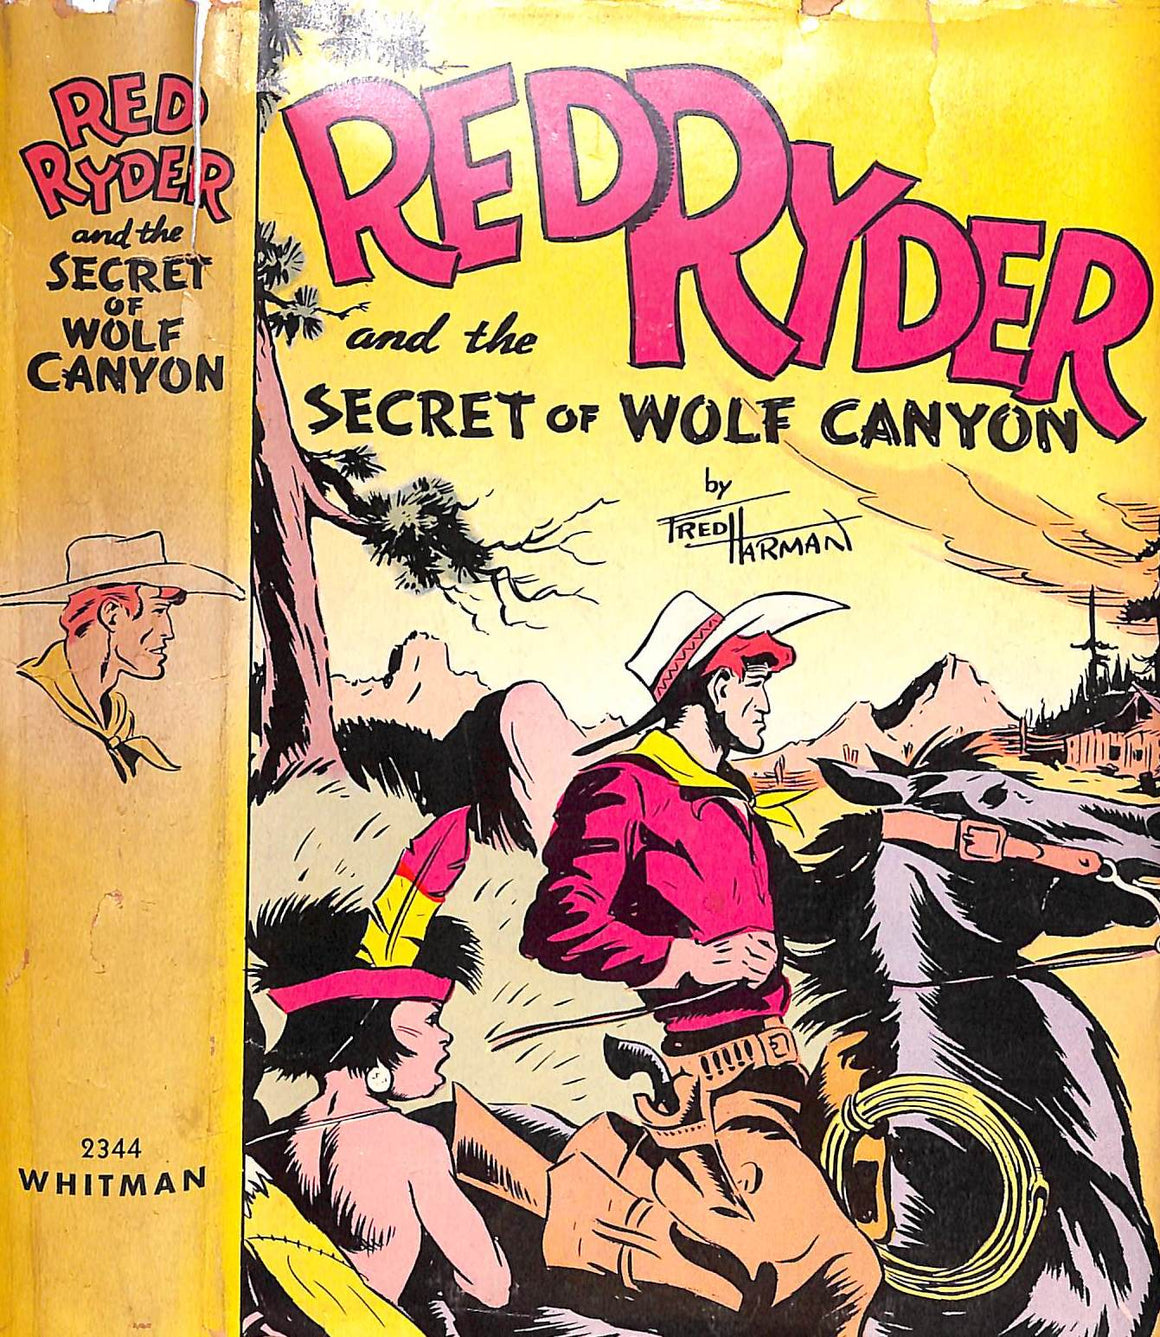 "Red Ryder And The Secret Wolf Canyon" 1941 HARMAN, Fred